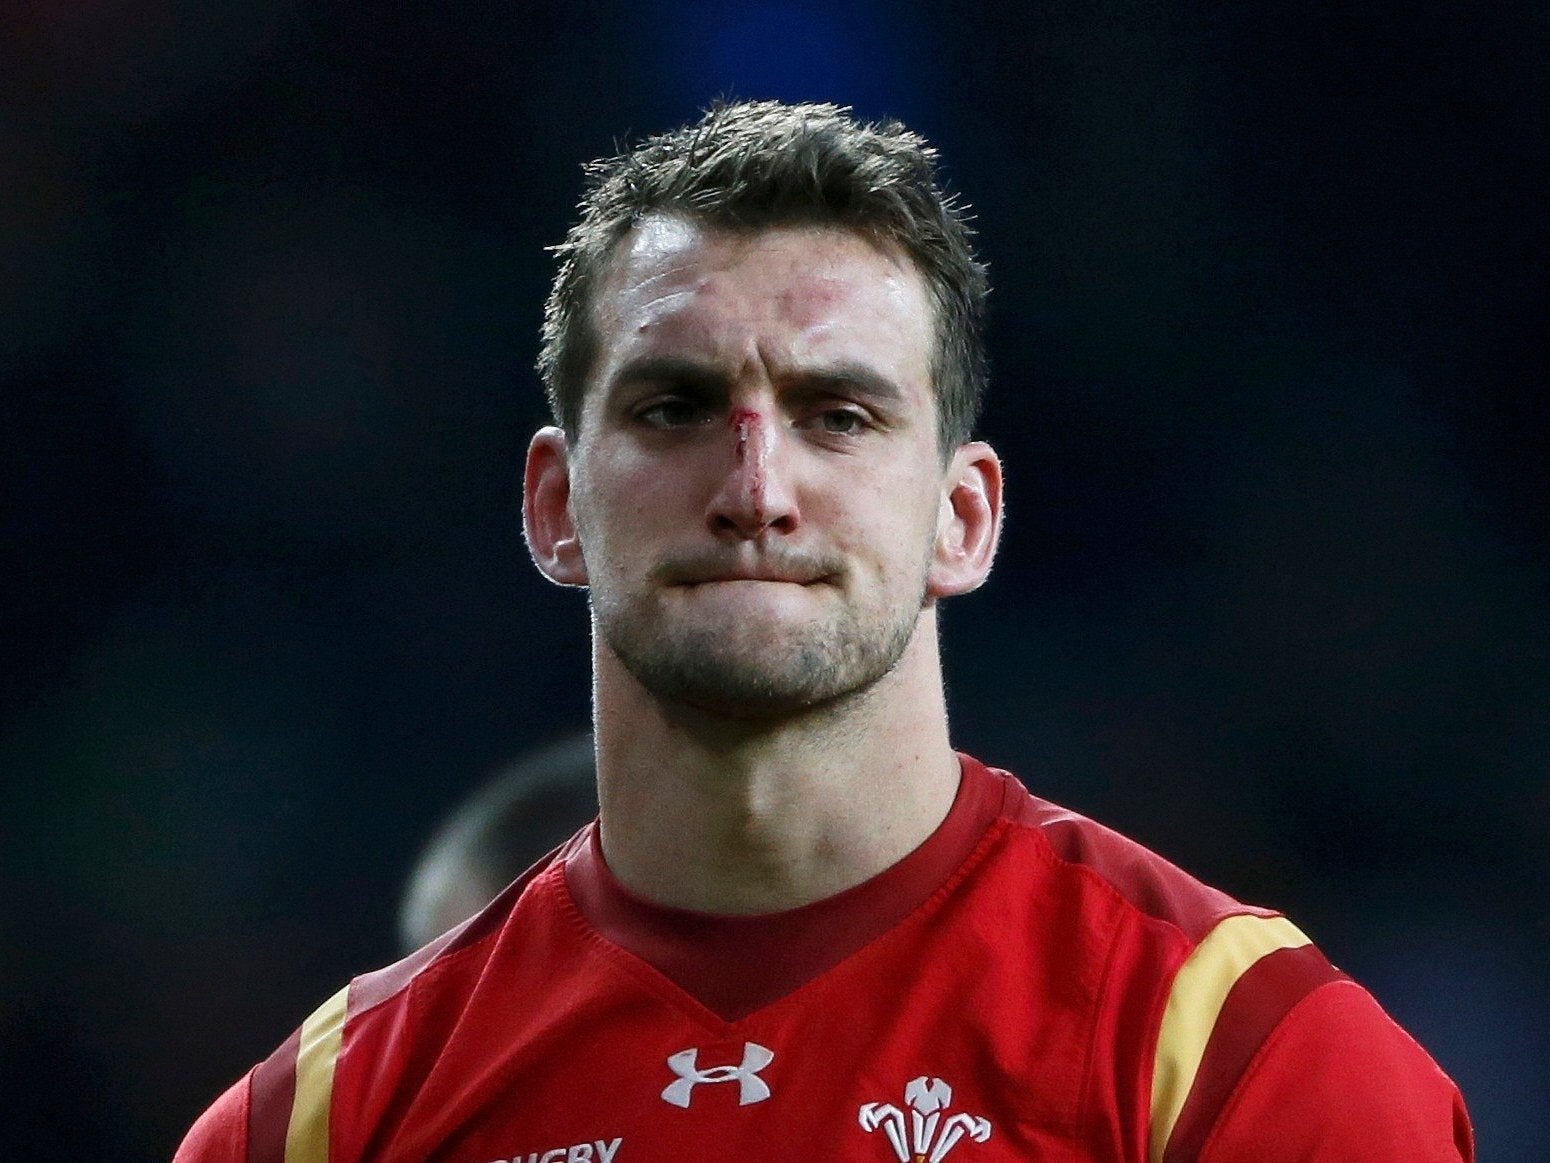 Warburton retires at the age of 29 after captaining Wales, Cardiff Blues and the Lions